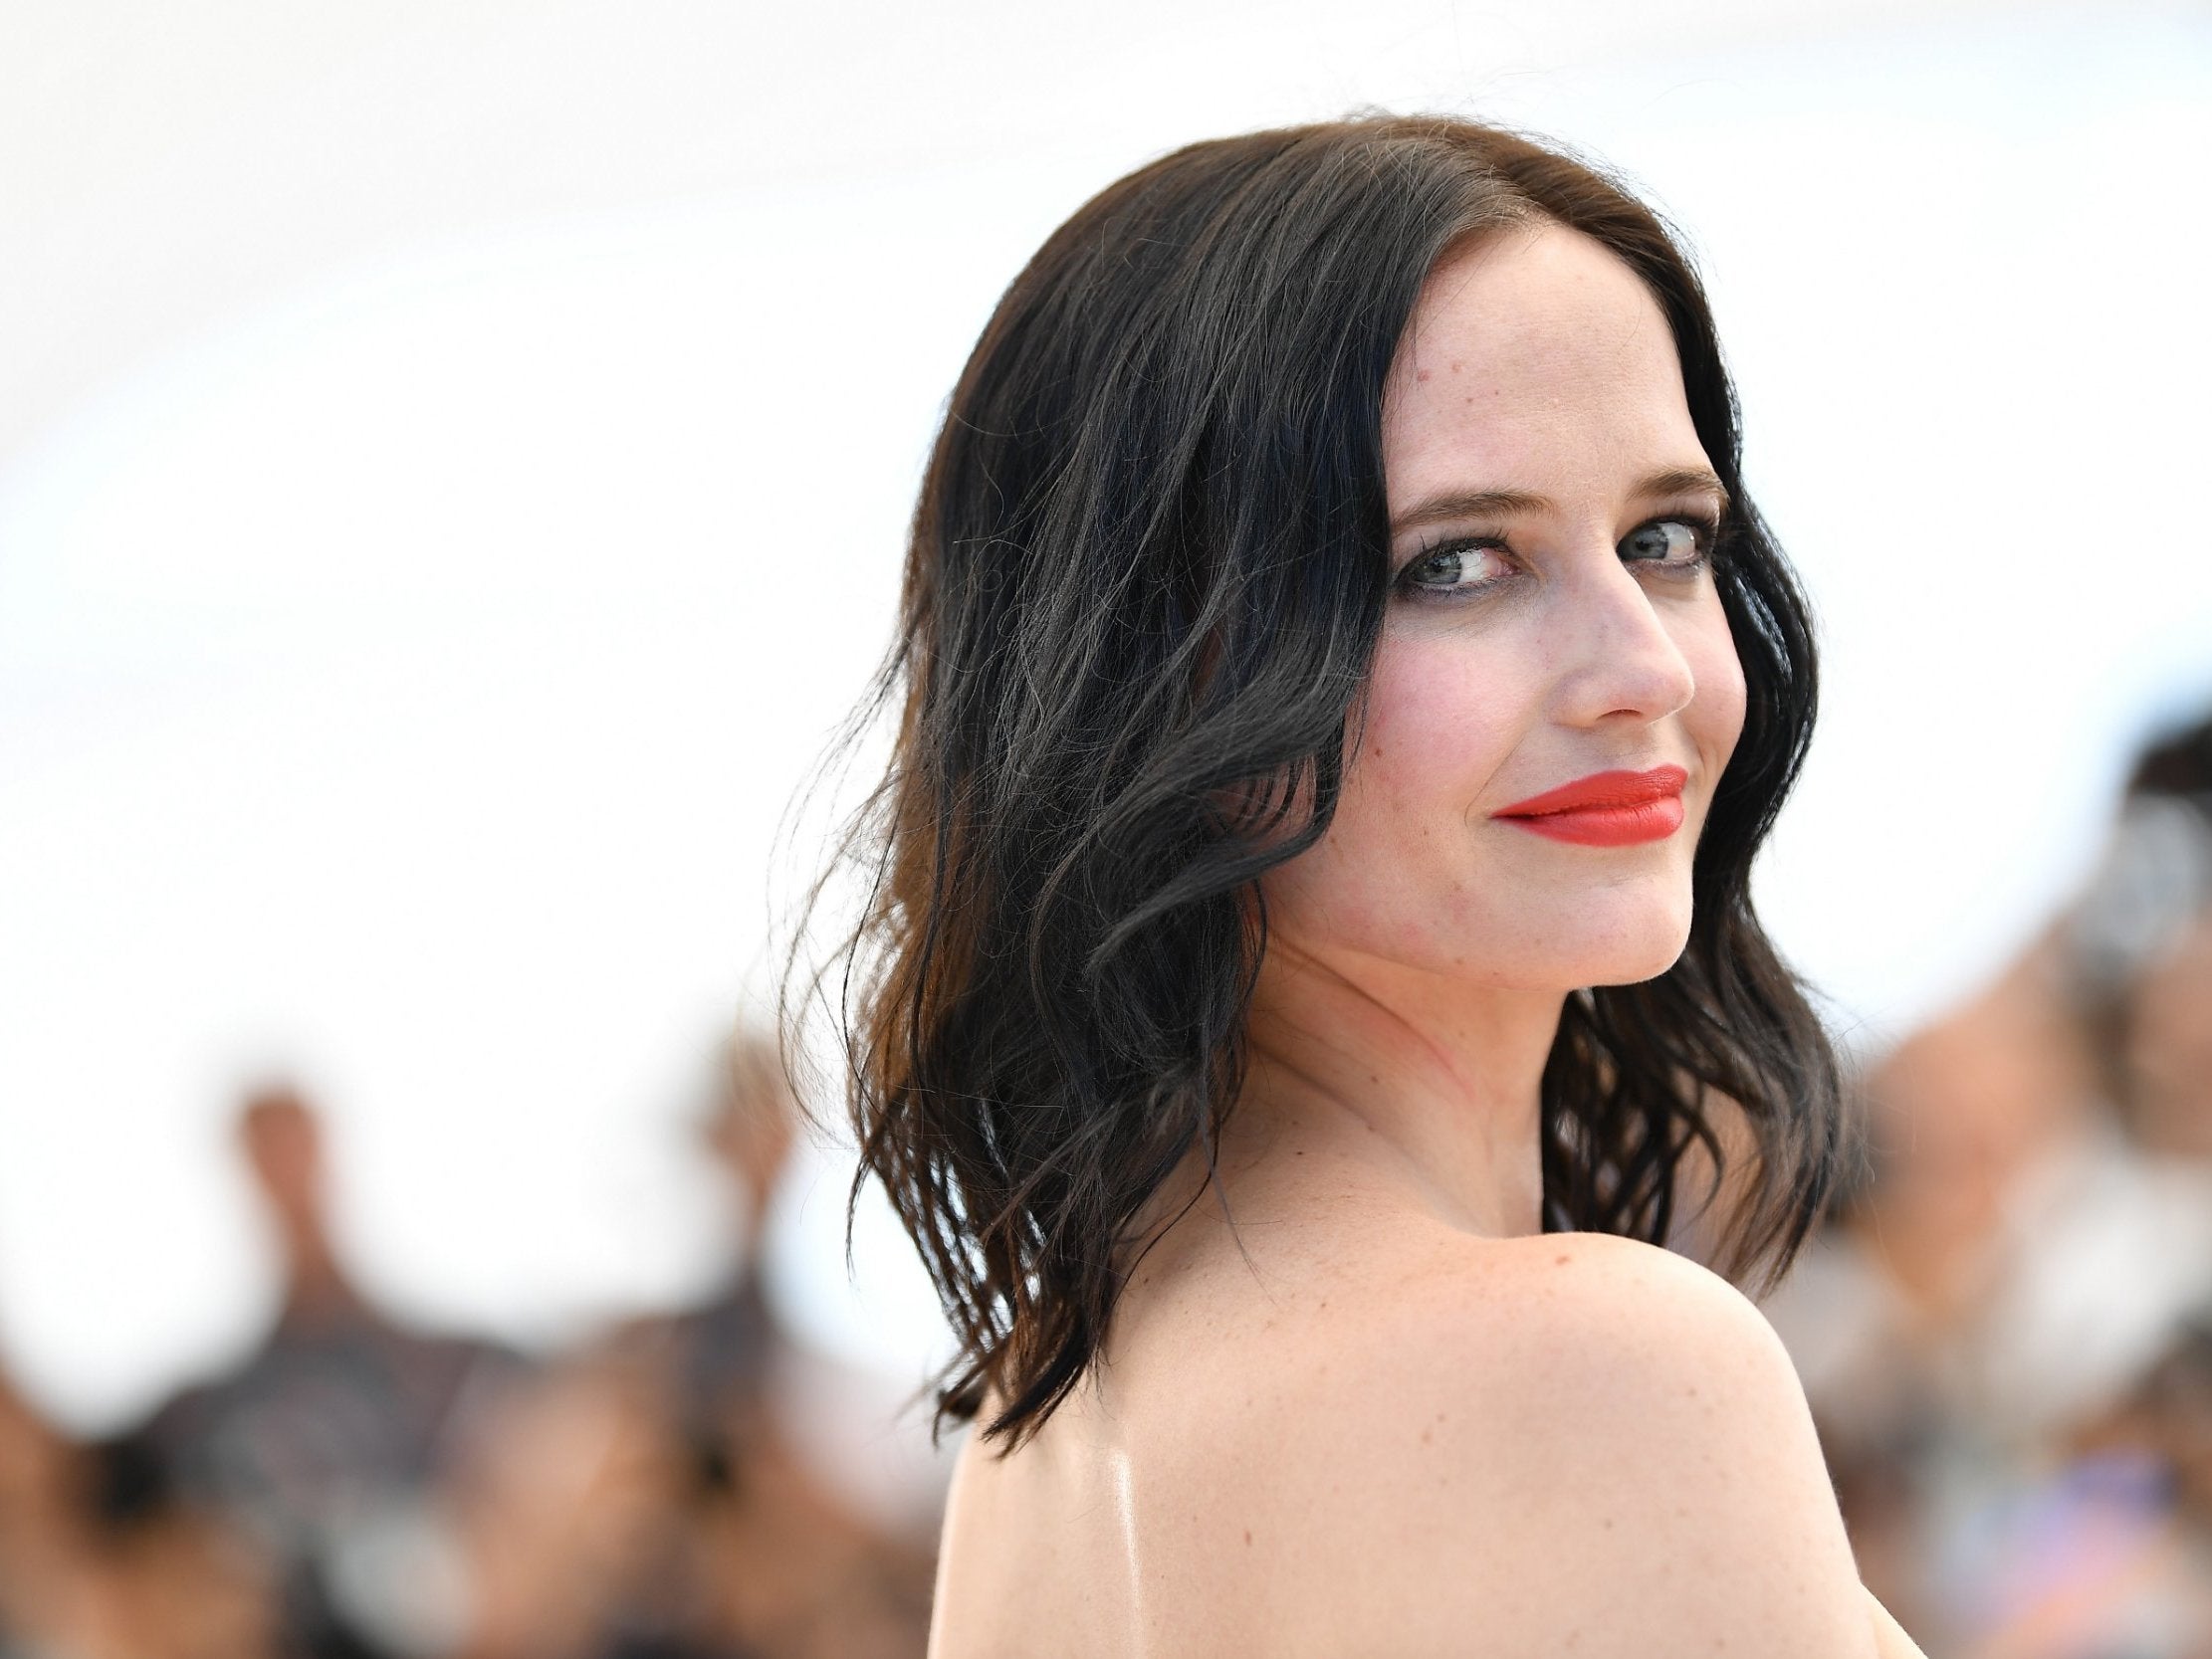 Why Eva Green has Hollywood's most notorious breasts